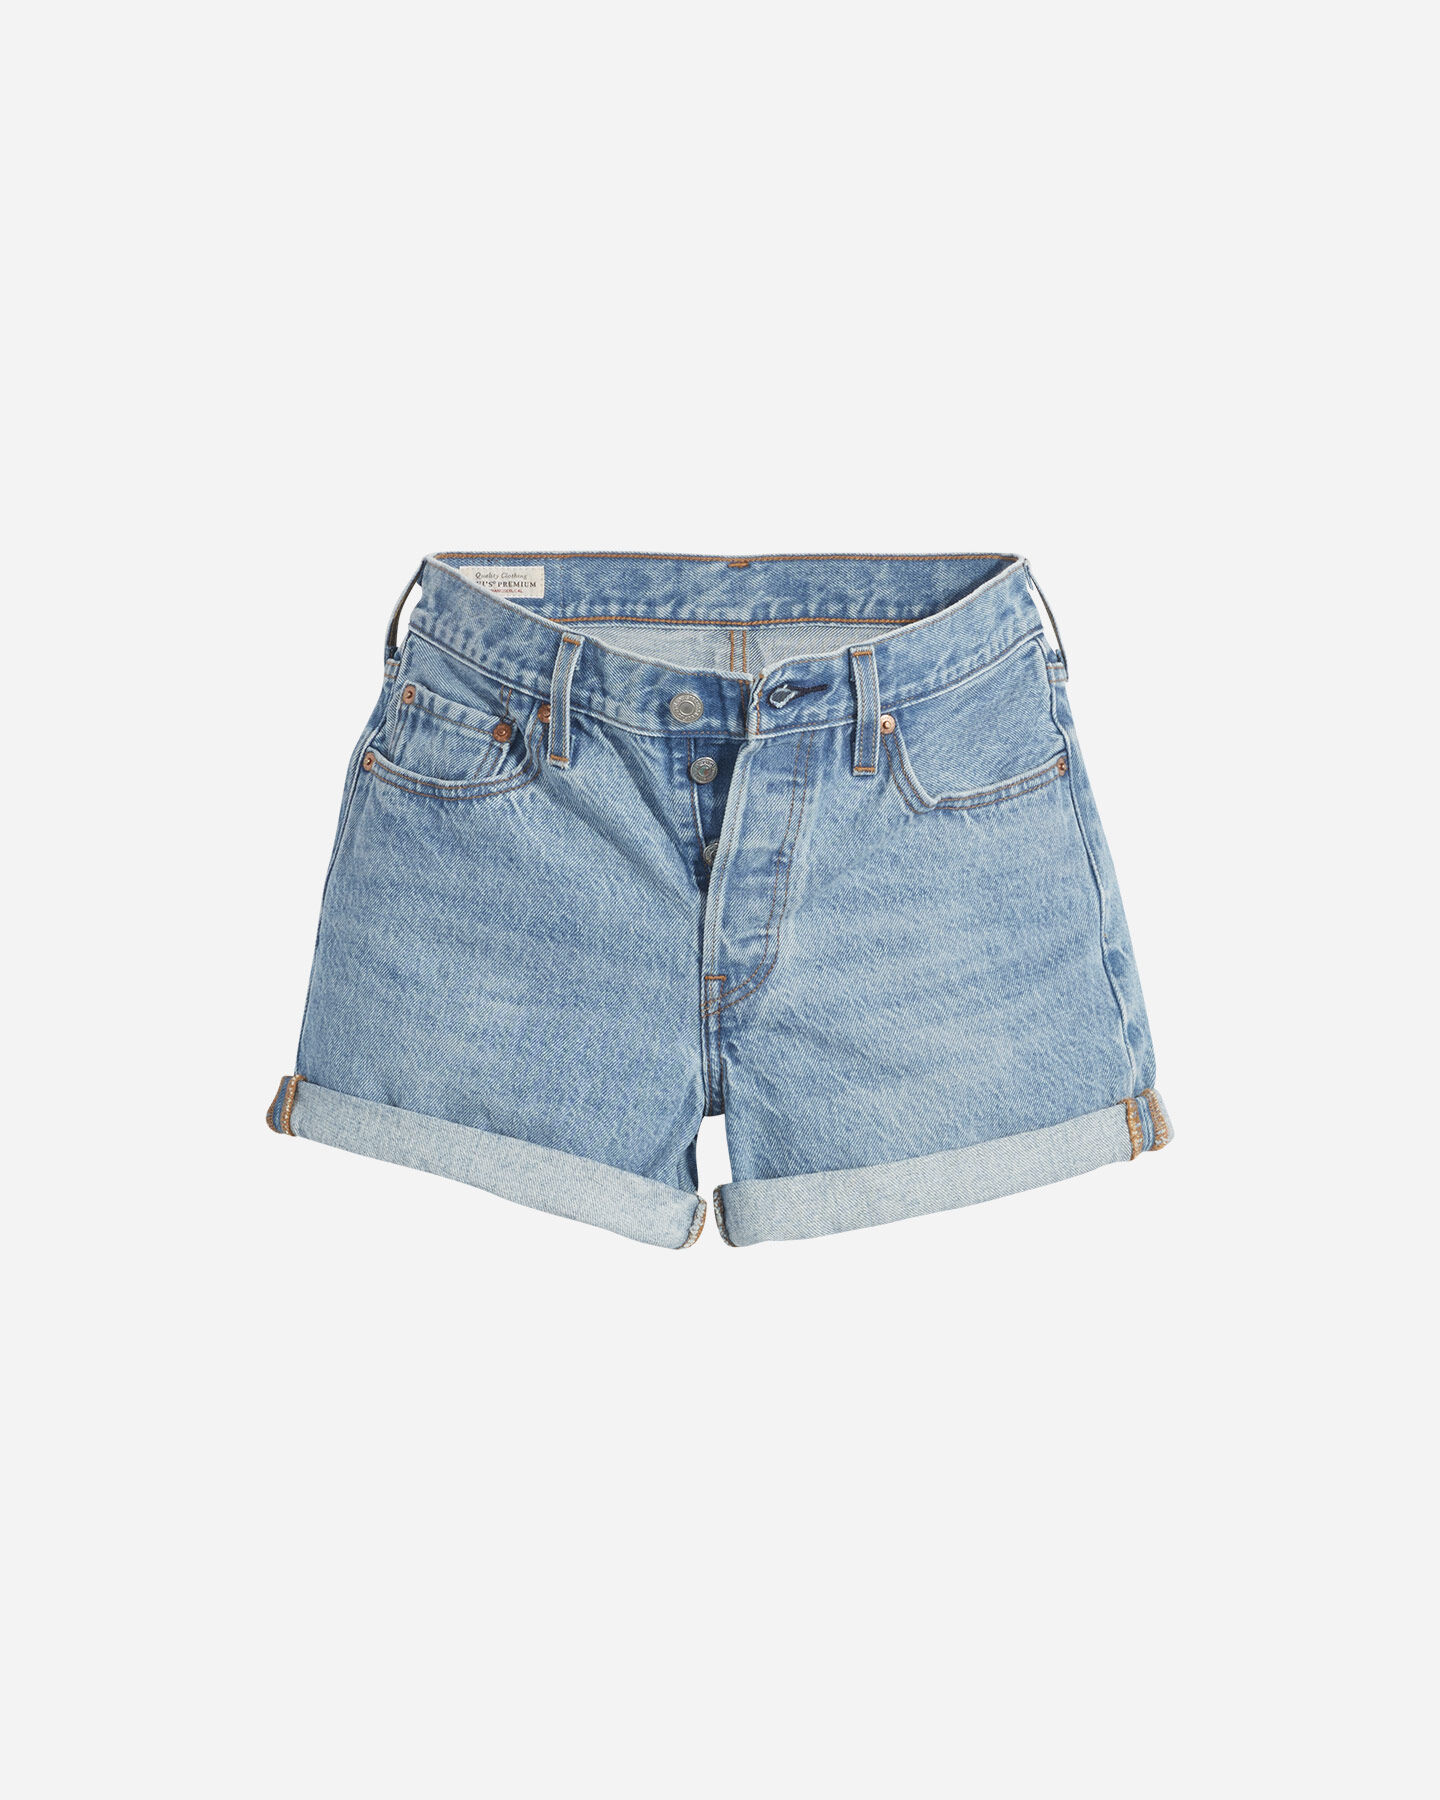  Jeans LEVI'S 501 ROLLED SHORT DENIM W S4104866|0032|25 scatto 0